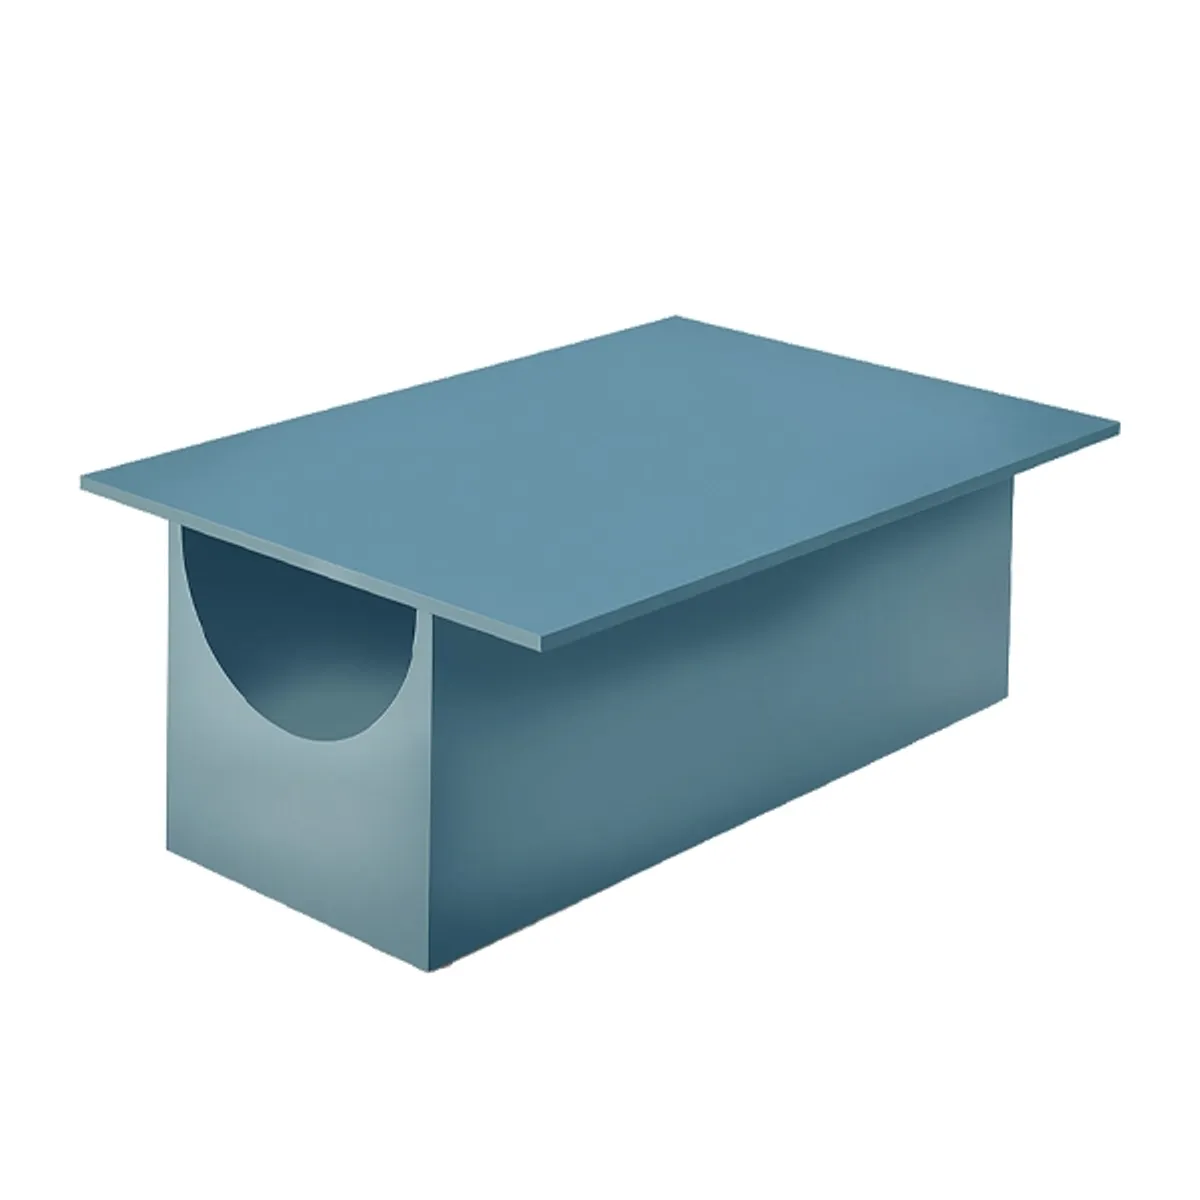 Vestige square coffee table Inside Out Contracts4